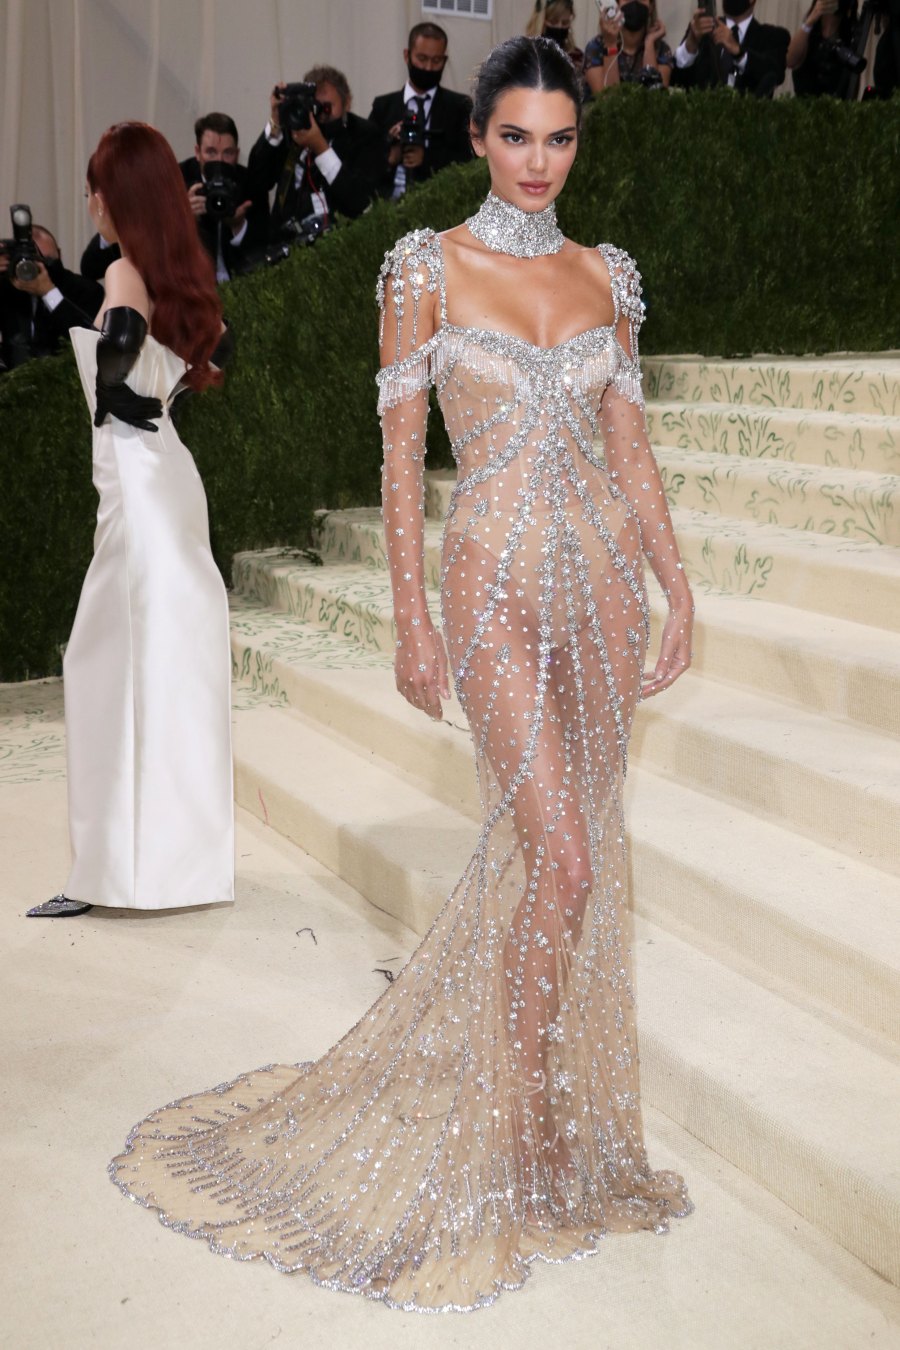 Kendall stunned in a sheer Givenchy gown